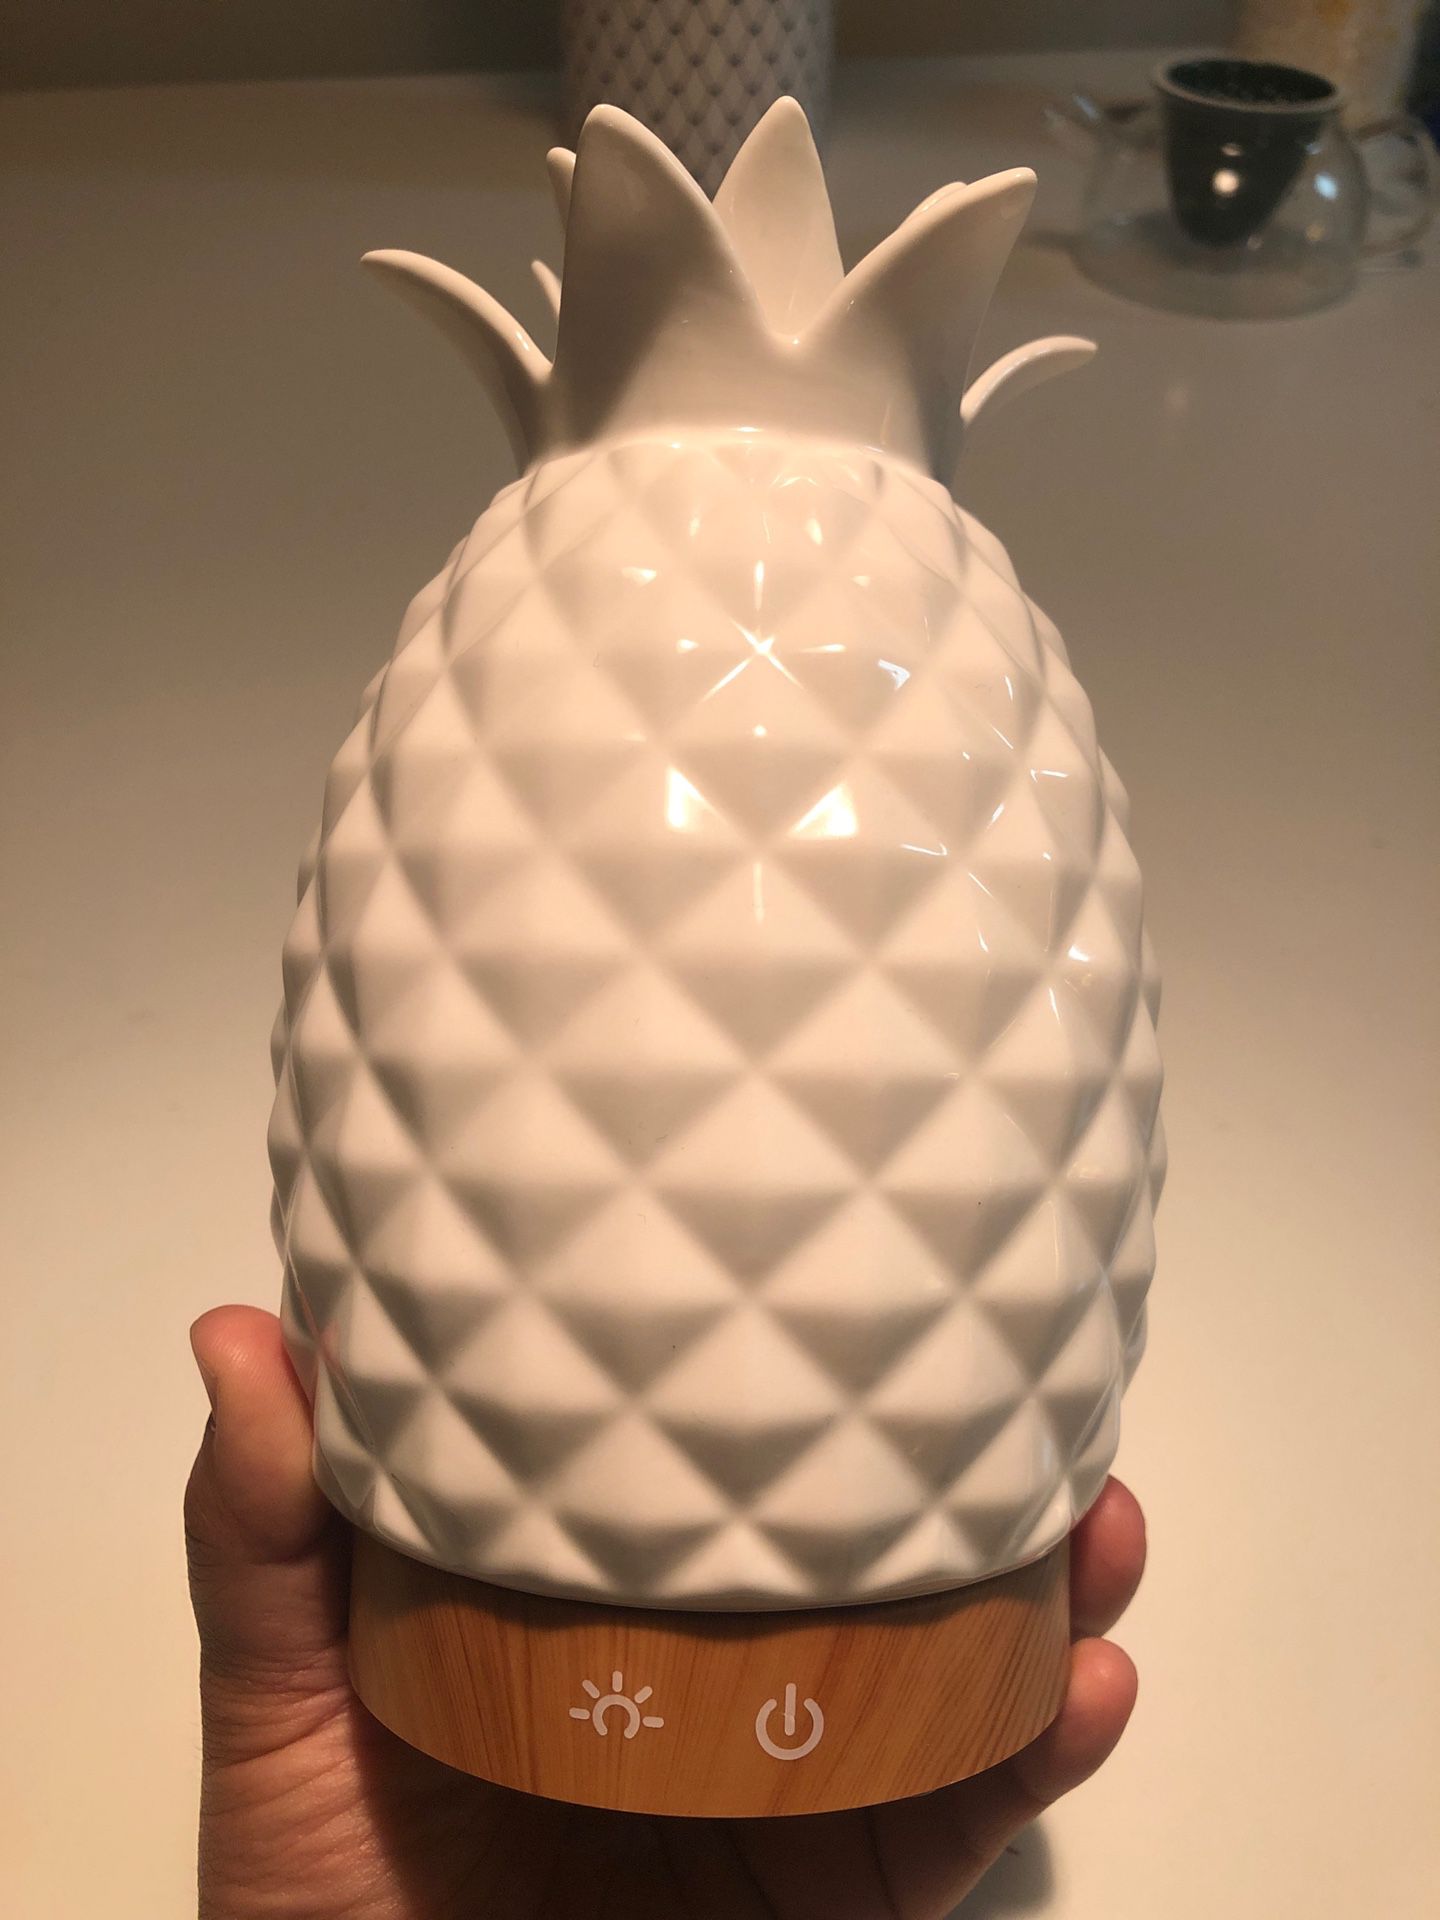 Aromatic pineapple LED diffuser